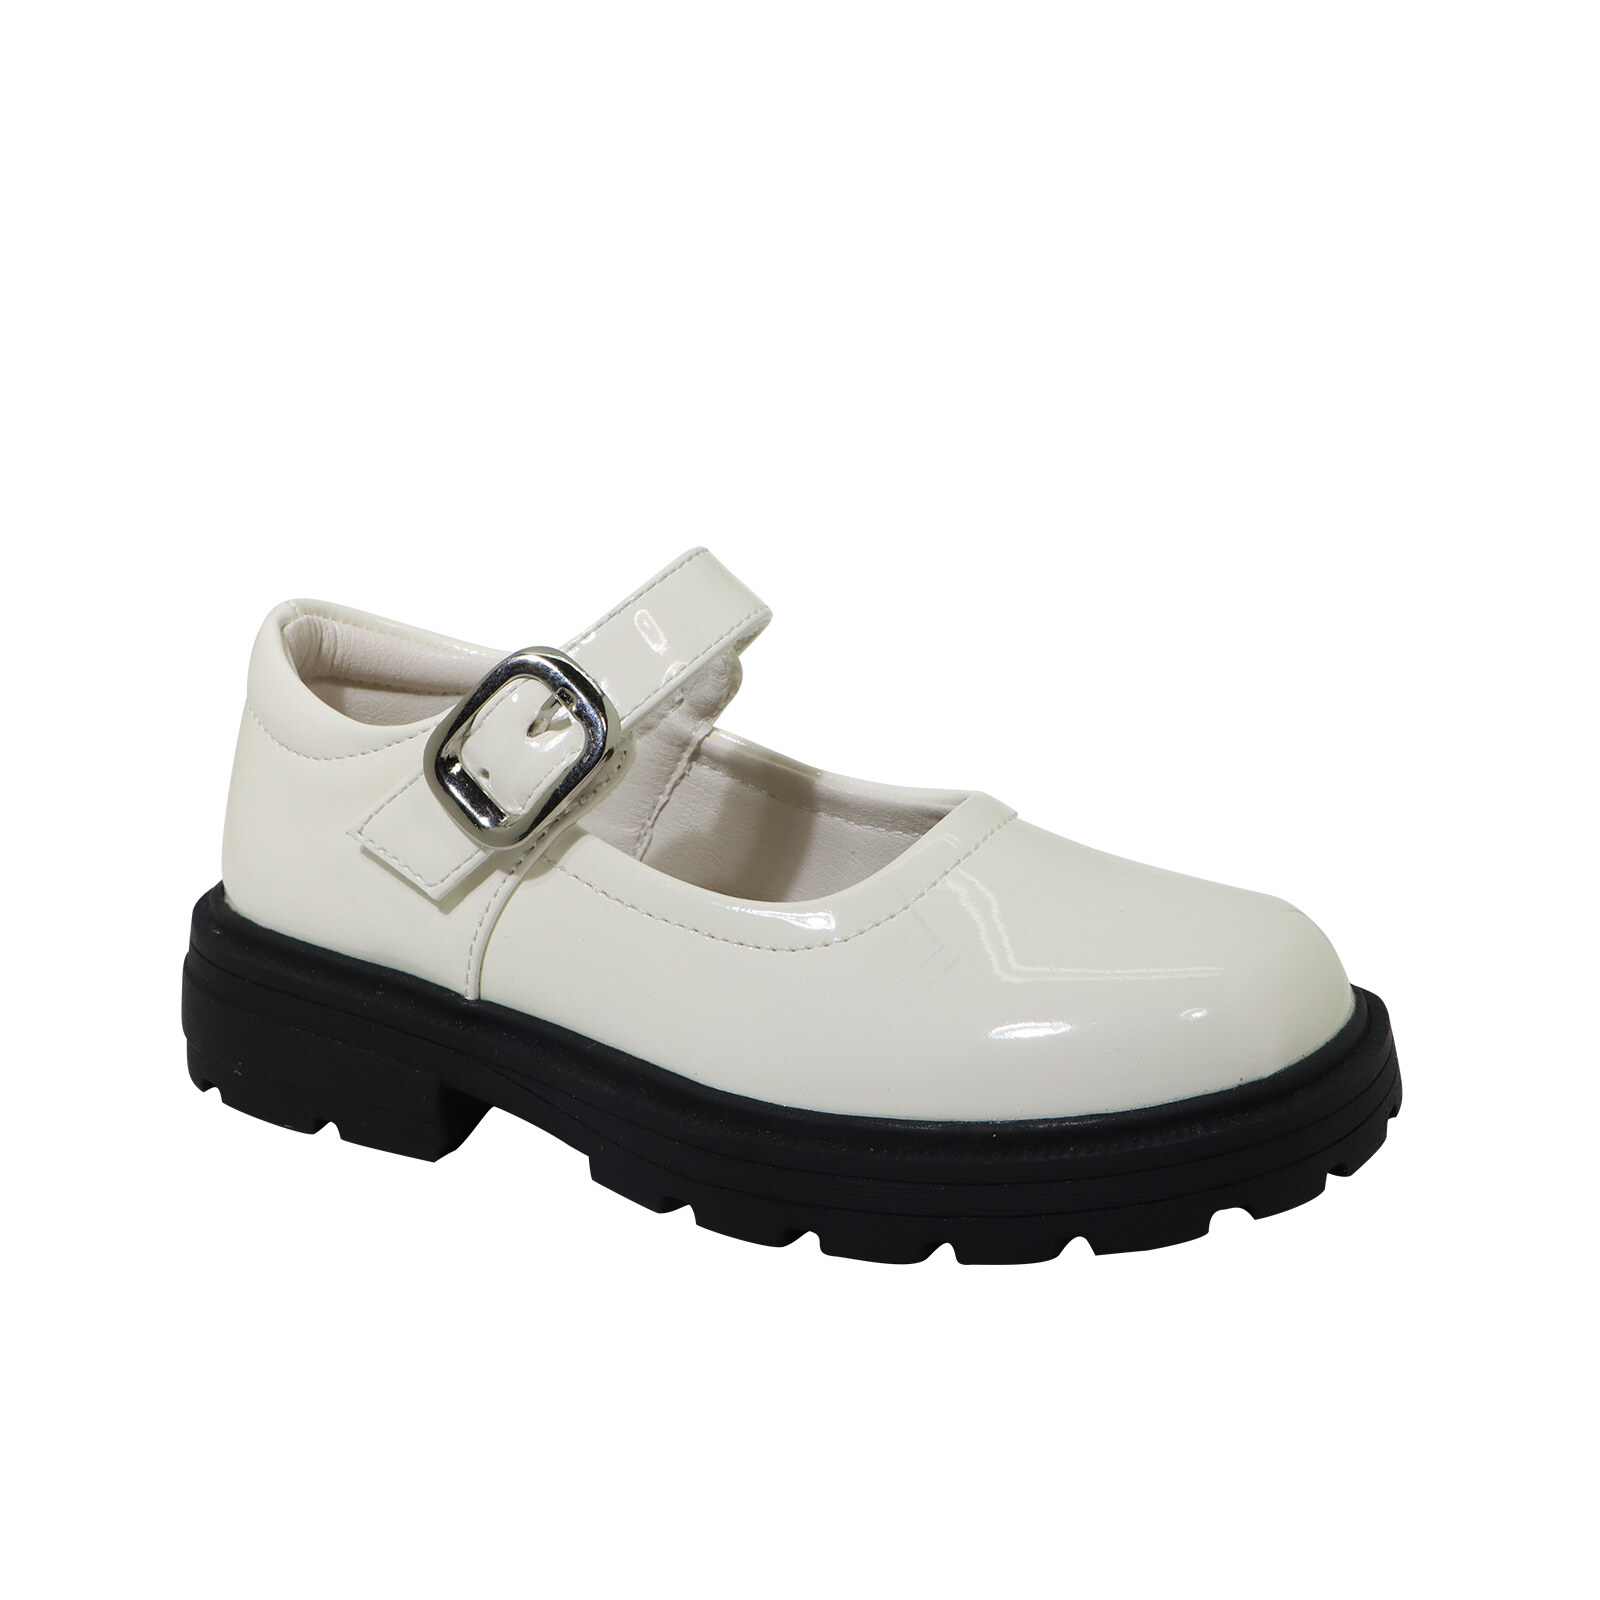 School customized pupil's formal Shoes new style